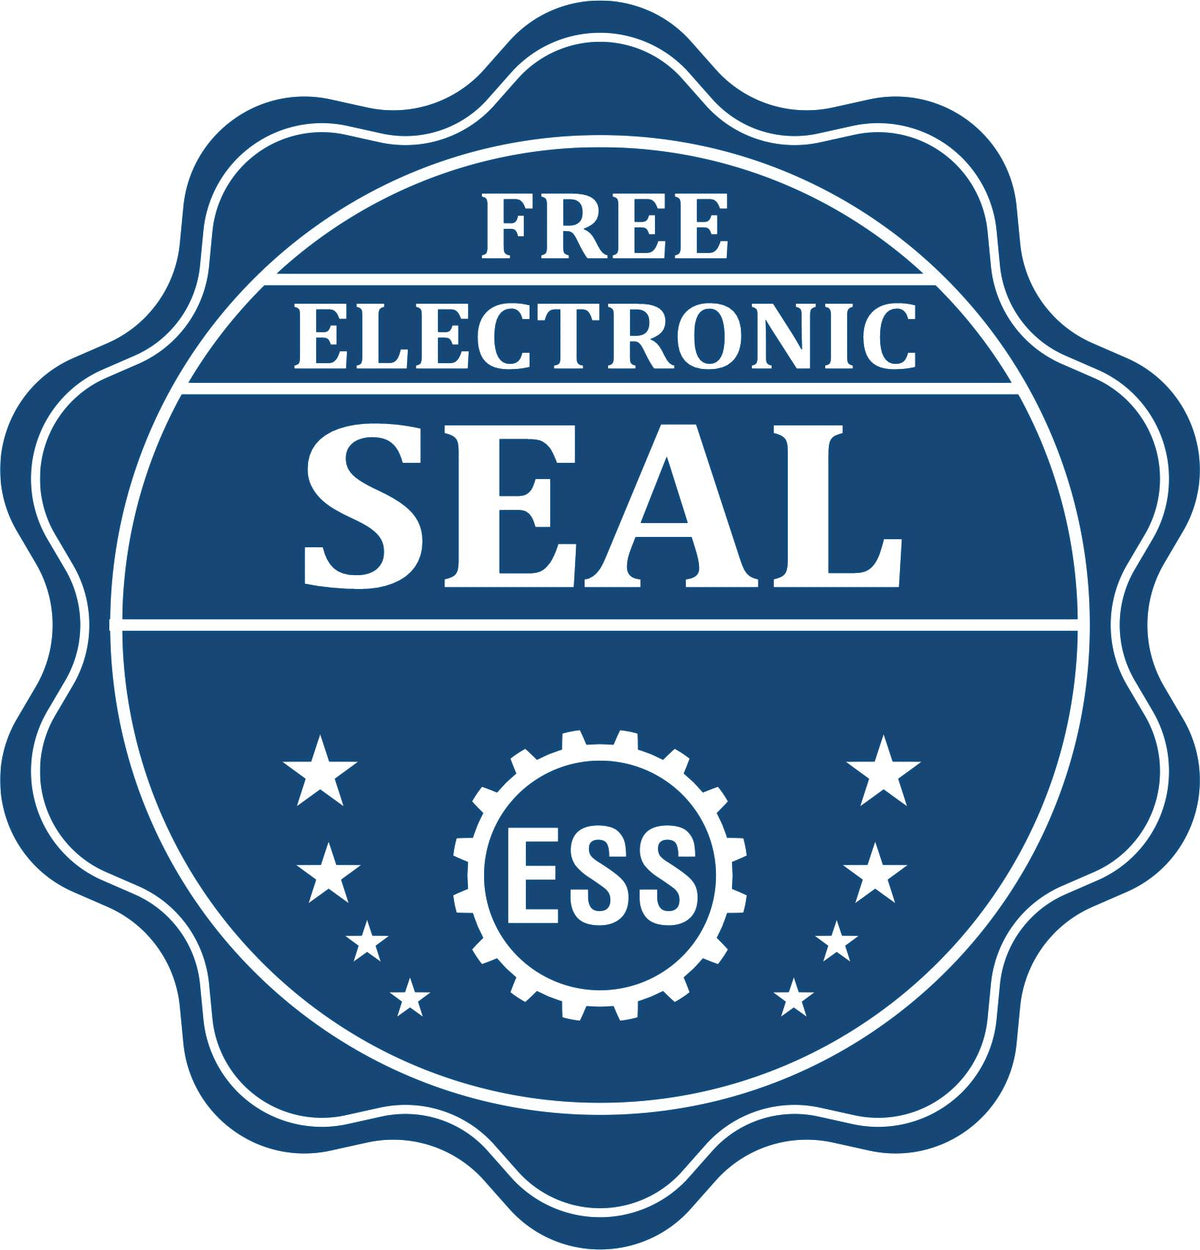 A badge showing a free electronic seal for the Montana Geologist Desk Seal with stars and the ESS gear on the emblem.